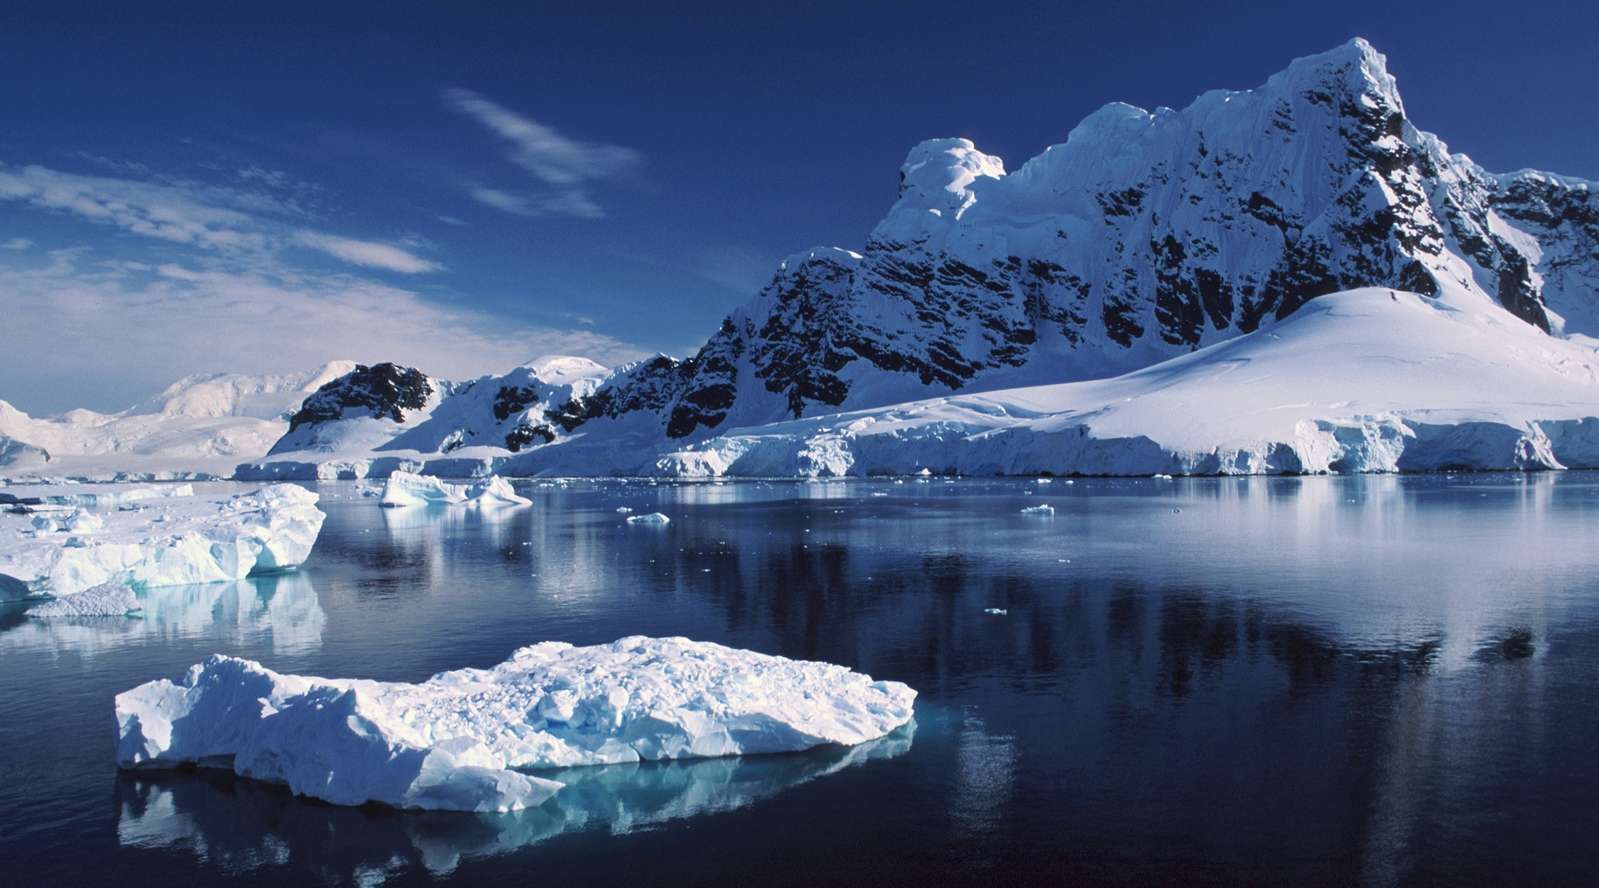 Icebergs and mountains in Antarctica landscape